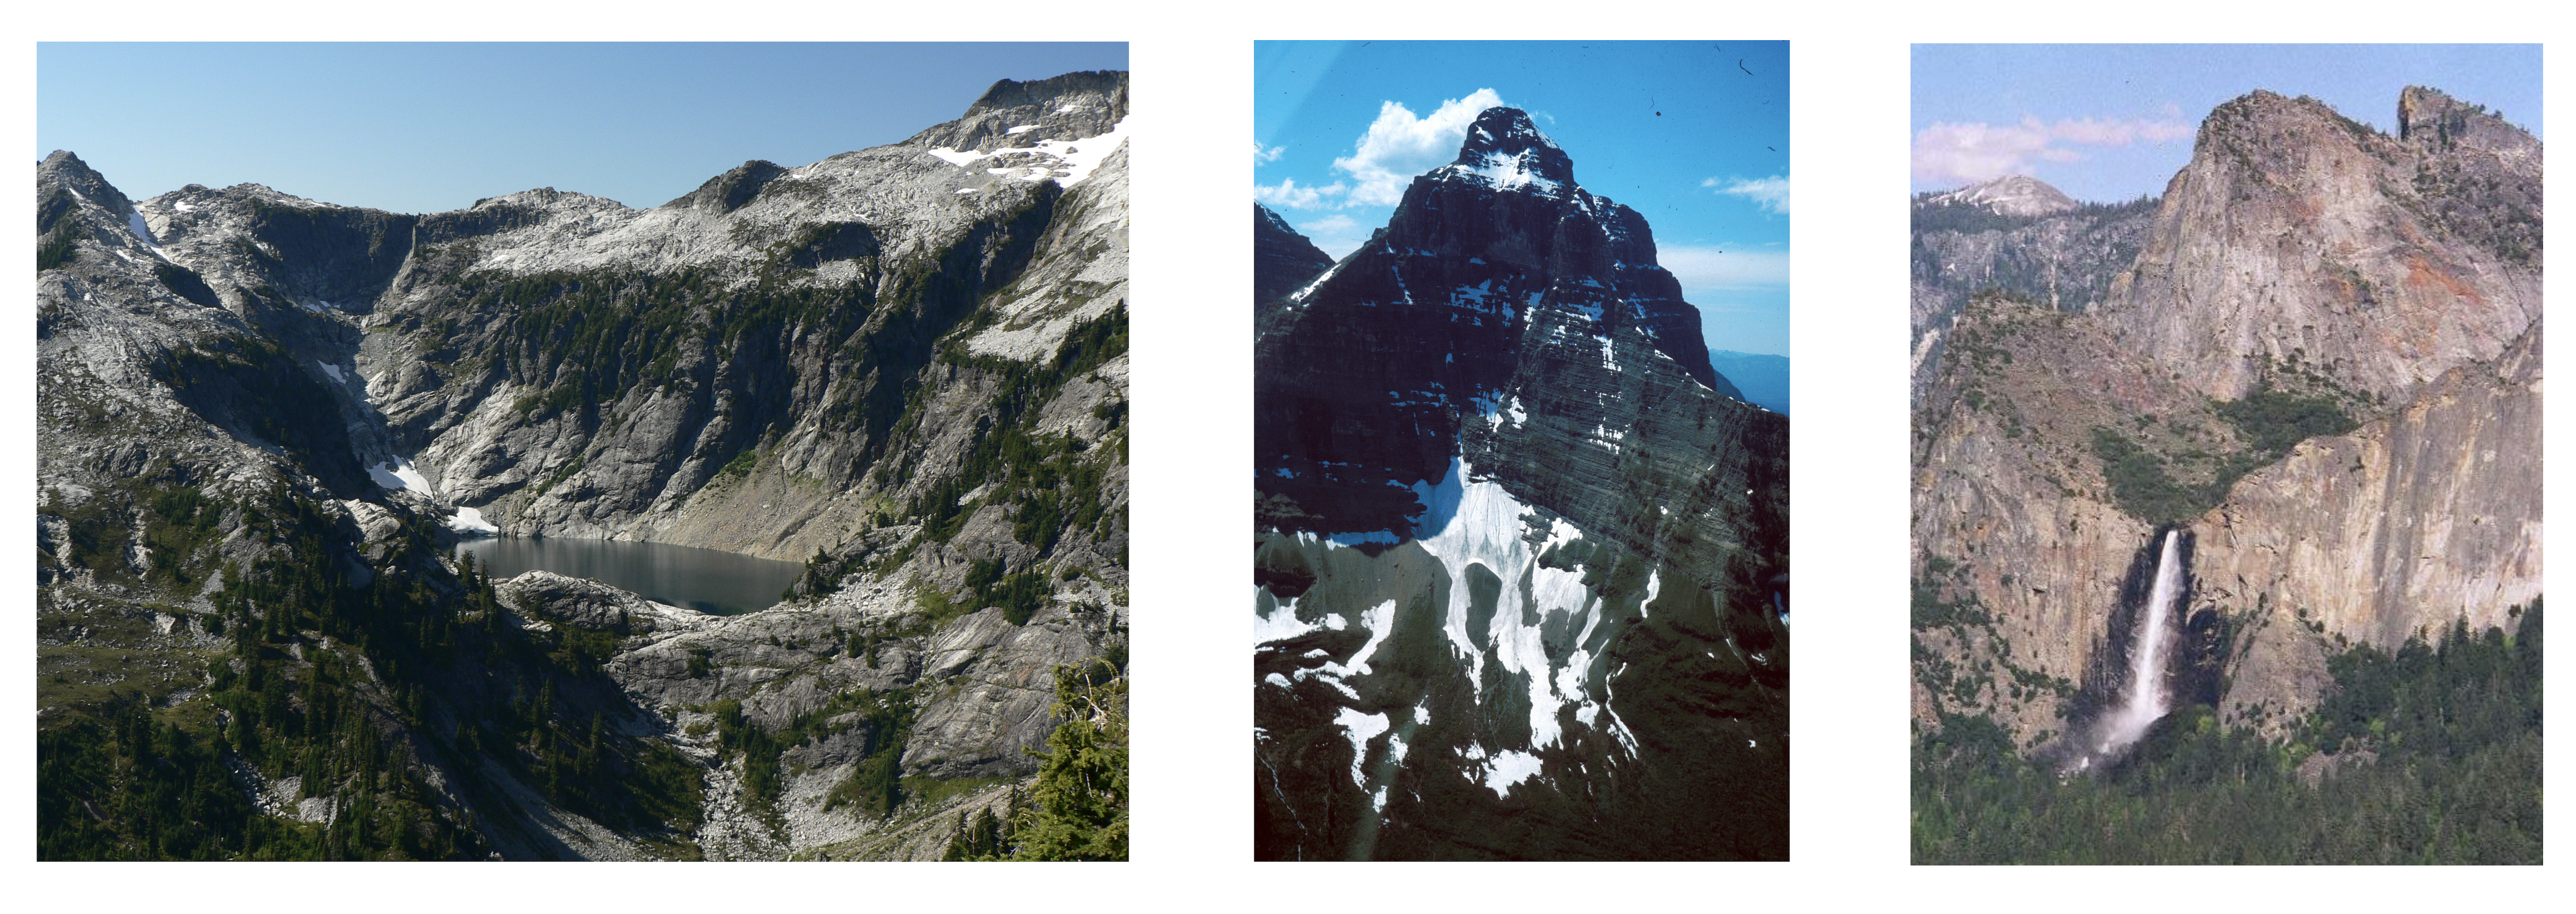 Three photos: the left photo shows a steep rocky mountain that has an amphitheatre-like valley carved out of the top of the mountain, with a lake at the base. The middle photo shows a steep and pointy rocky mountain top. The right photo shows a steep rocky mountain with a U-shaped valley halfway up the slope; a large waterfall flows out of the mid-height valley onto the valley below.